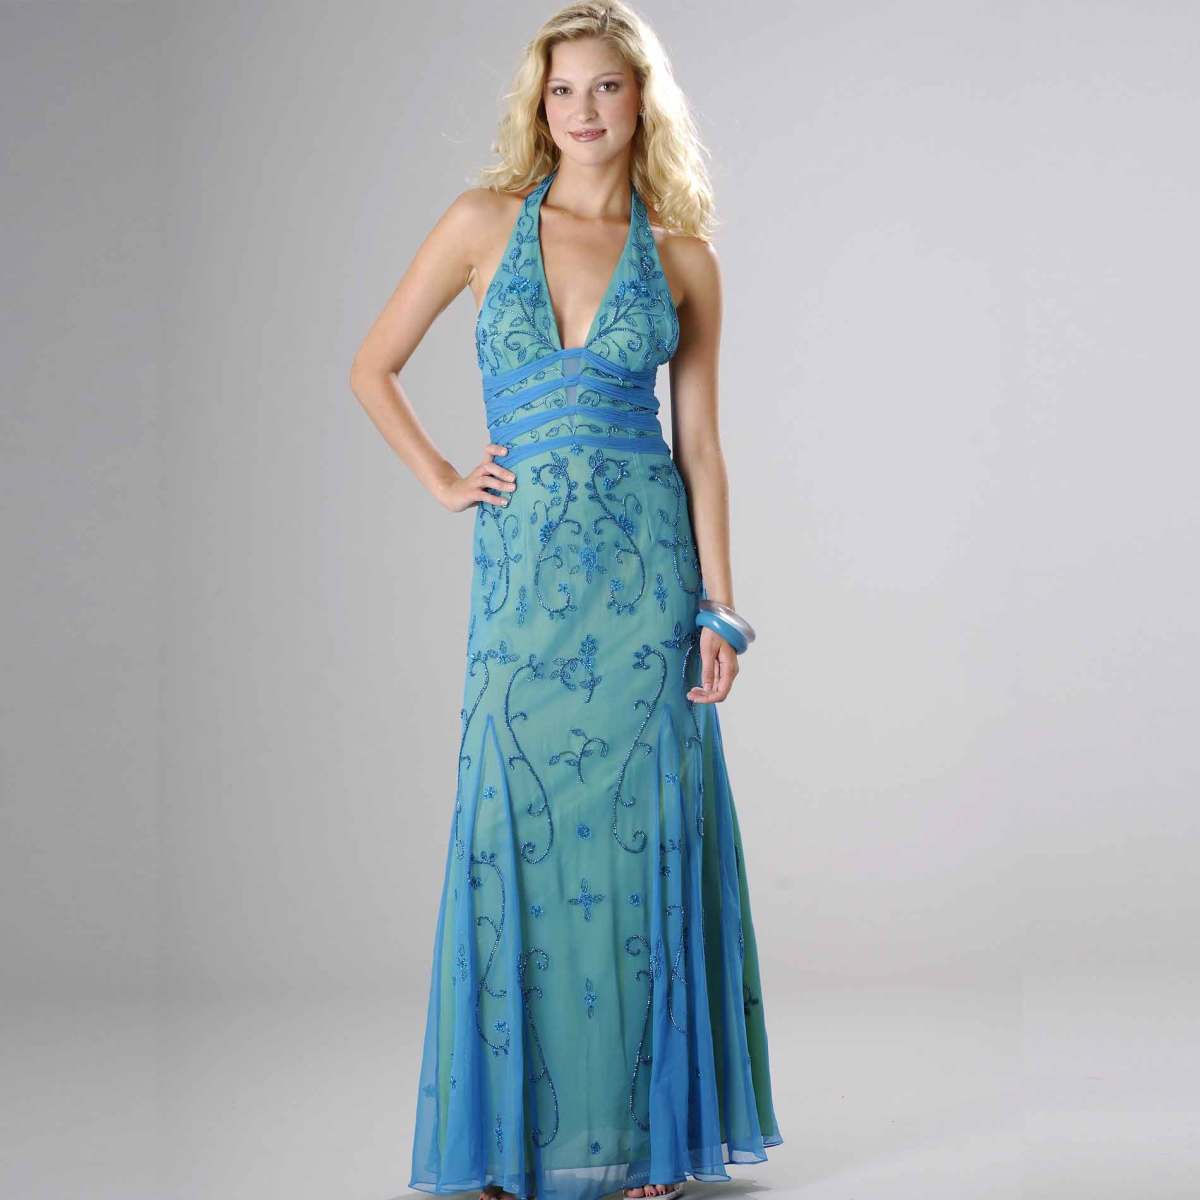 photo credit: sears.com. Formal Gallery beaded prom dress, Womens long evening gown, Halter dress (50181), turq/lime,on sale for $149, reg price= $310, available in sizes small to extra large 